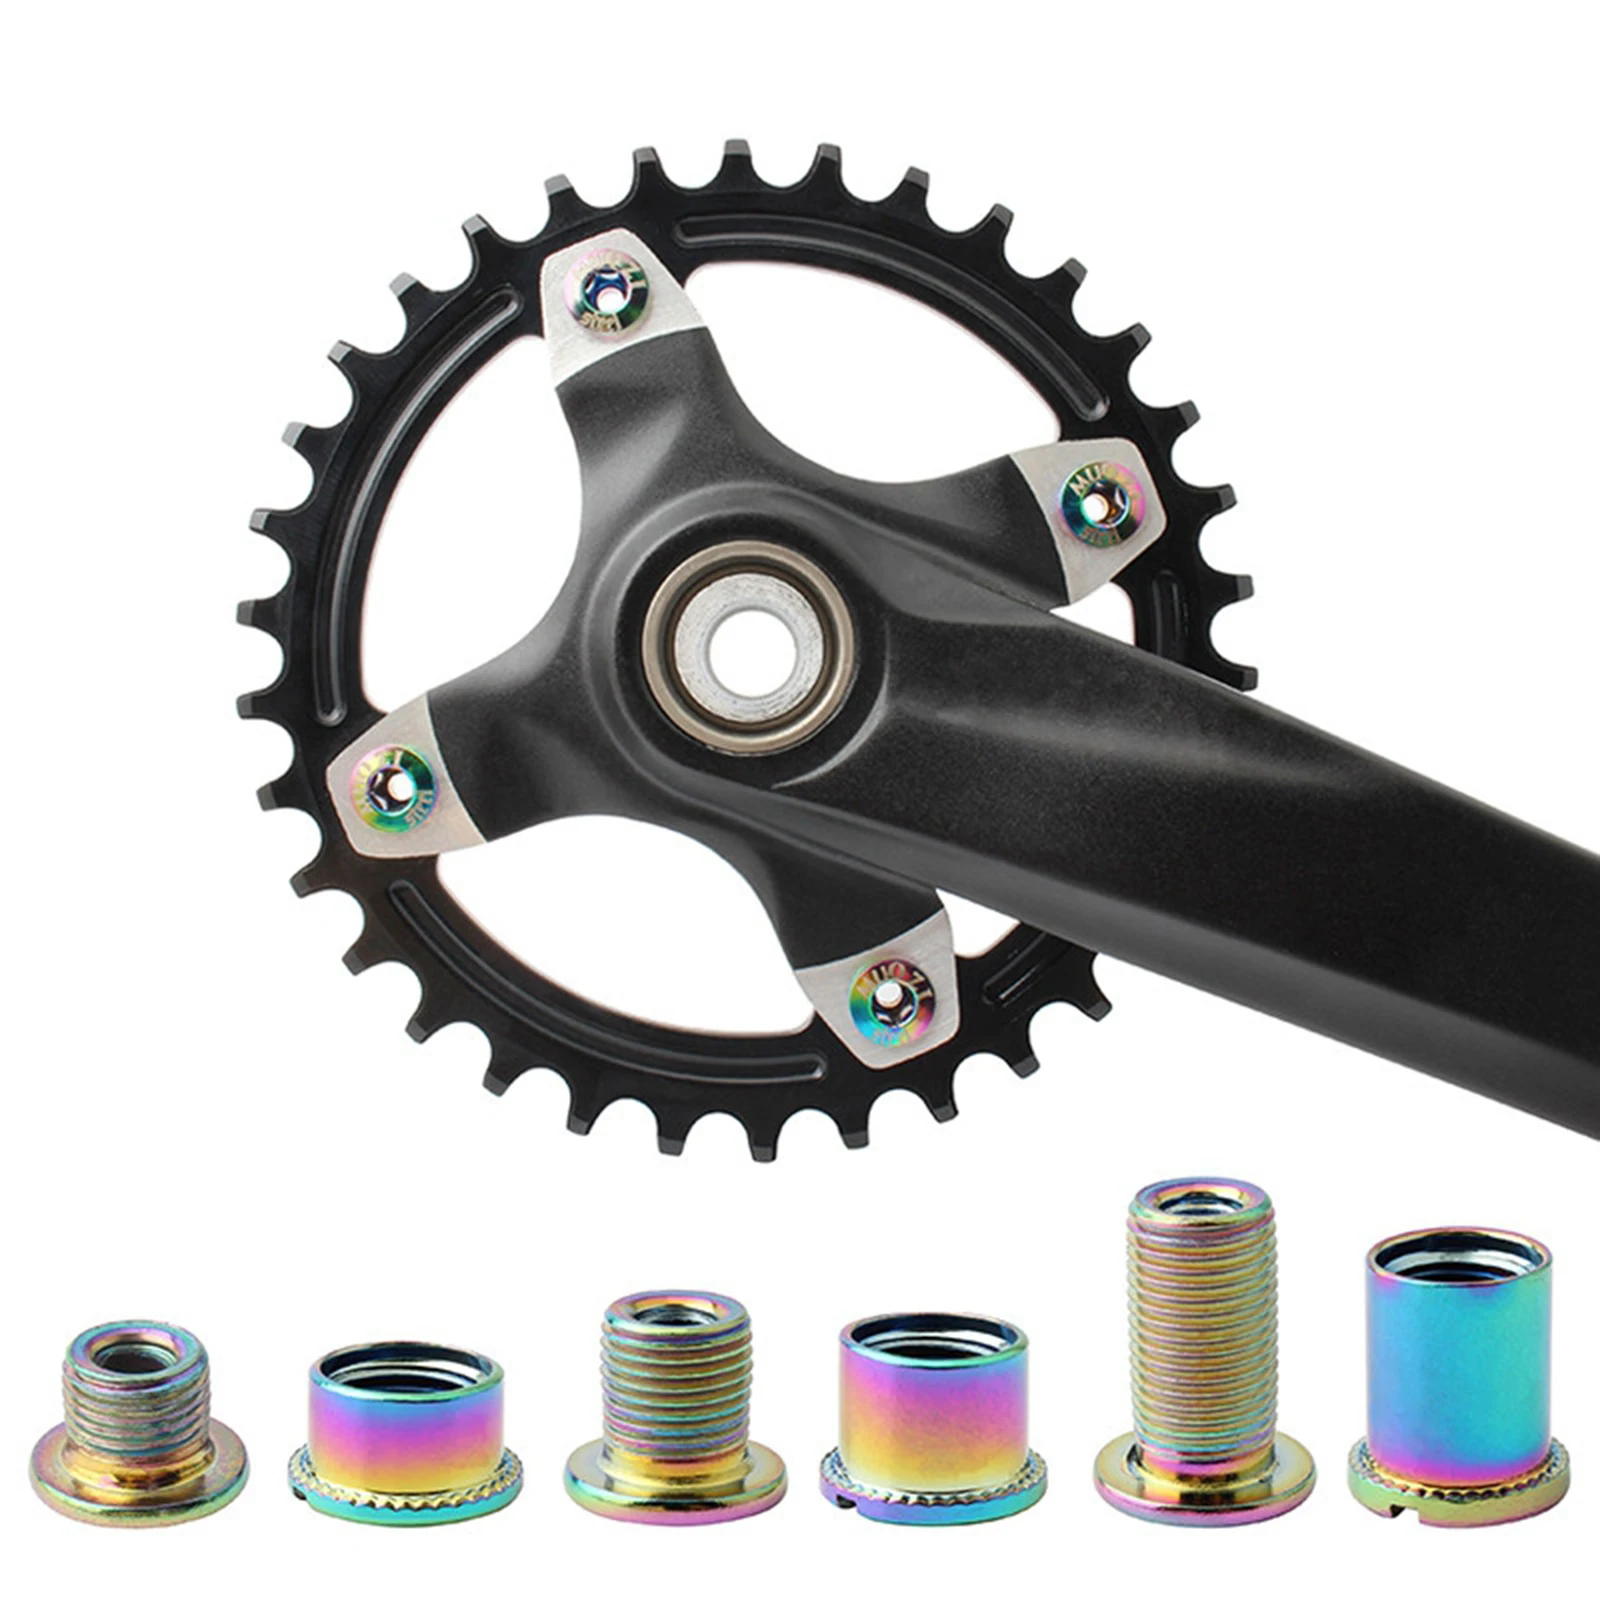 5x Bike Chainring M8 Bolt Nuts Solid Road Mountain Bicycle Chainwheel Screws Anti-Rust Sprockets Repair Bolt Accessories